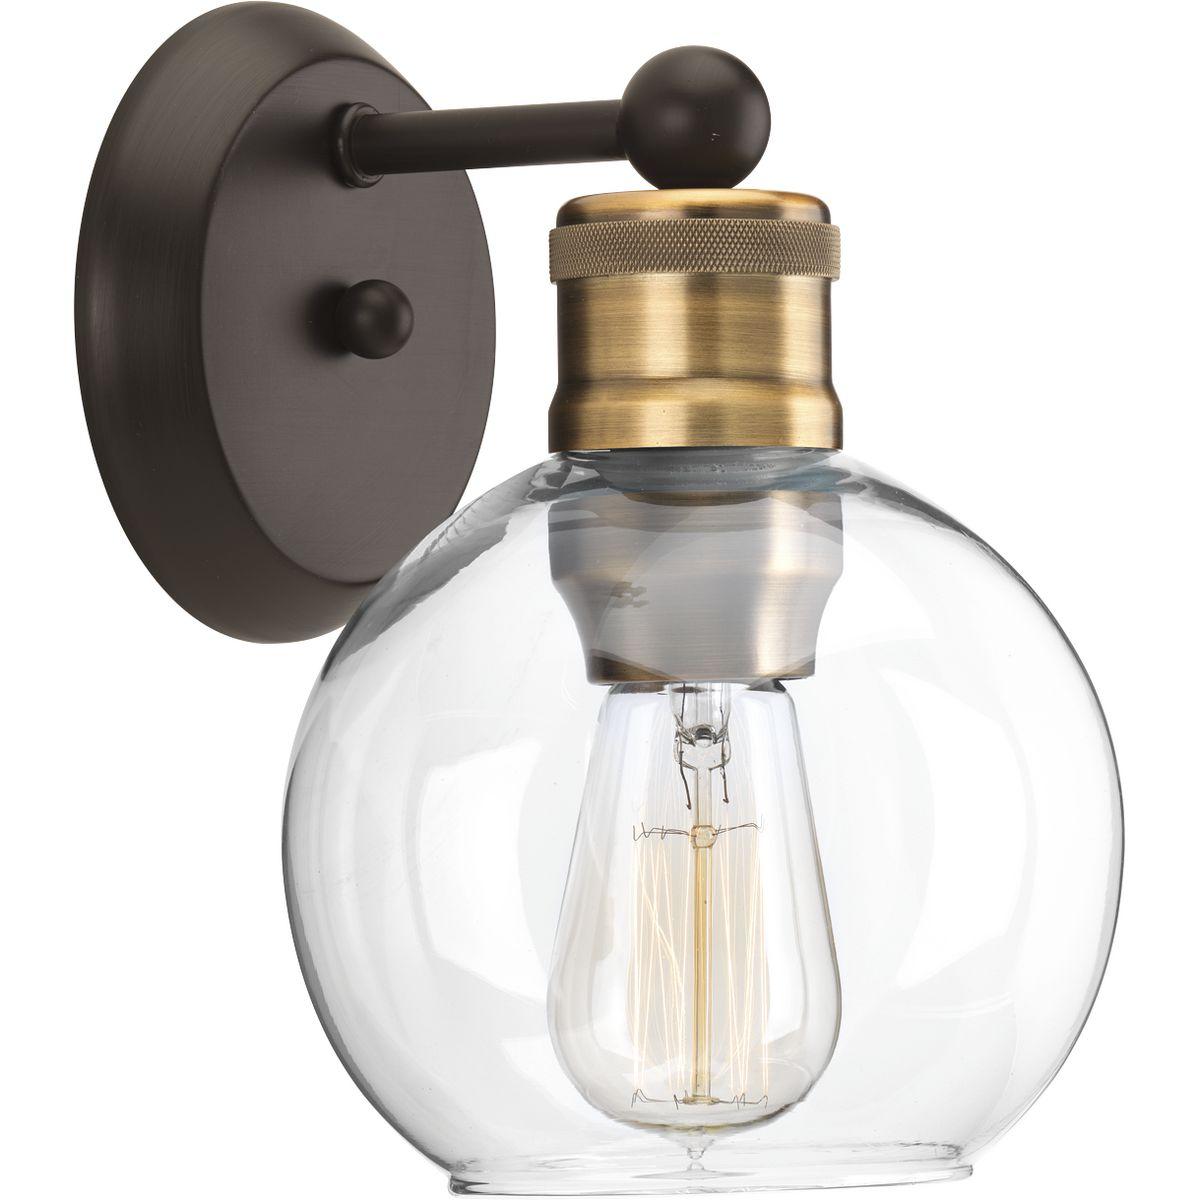 Hubbell P300049-020 The Hansford collection of fixtures feature a clear, spherical shade paired with vintage style metal fittings in an Antique Bronze and Vintage Brass combination finish. Featuring a clean and precise design with generous scale, Hansford's classic style bri